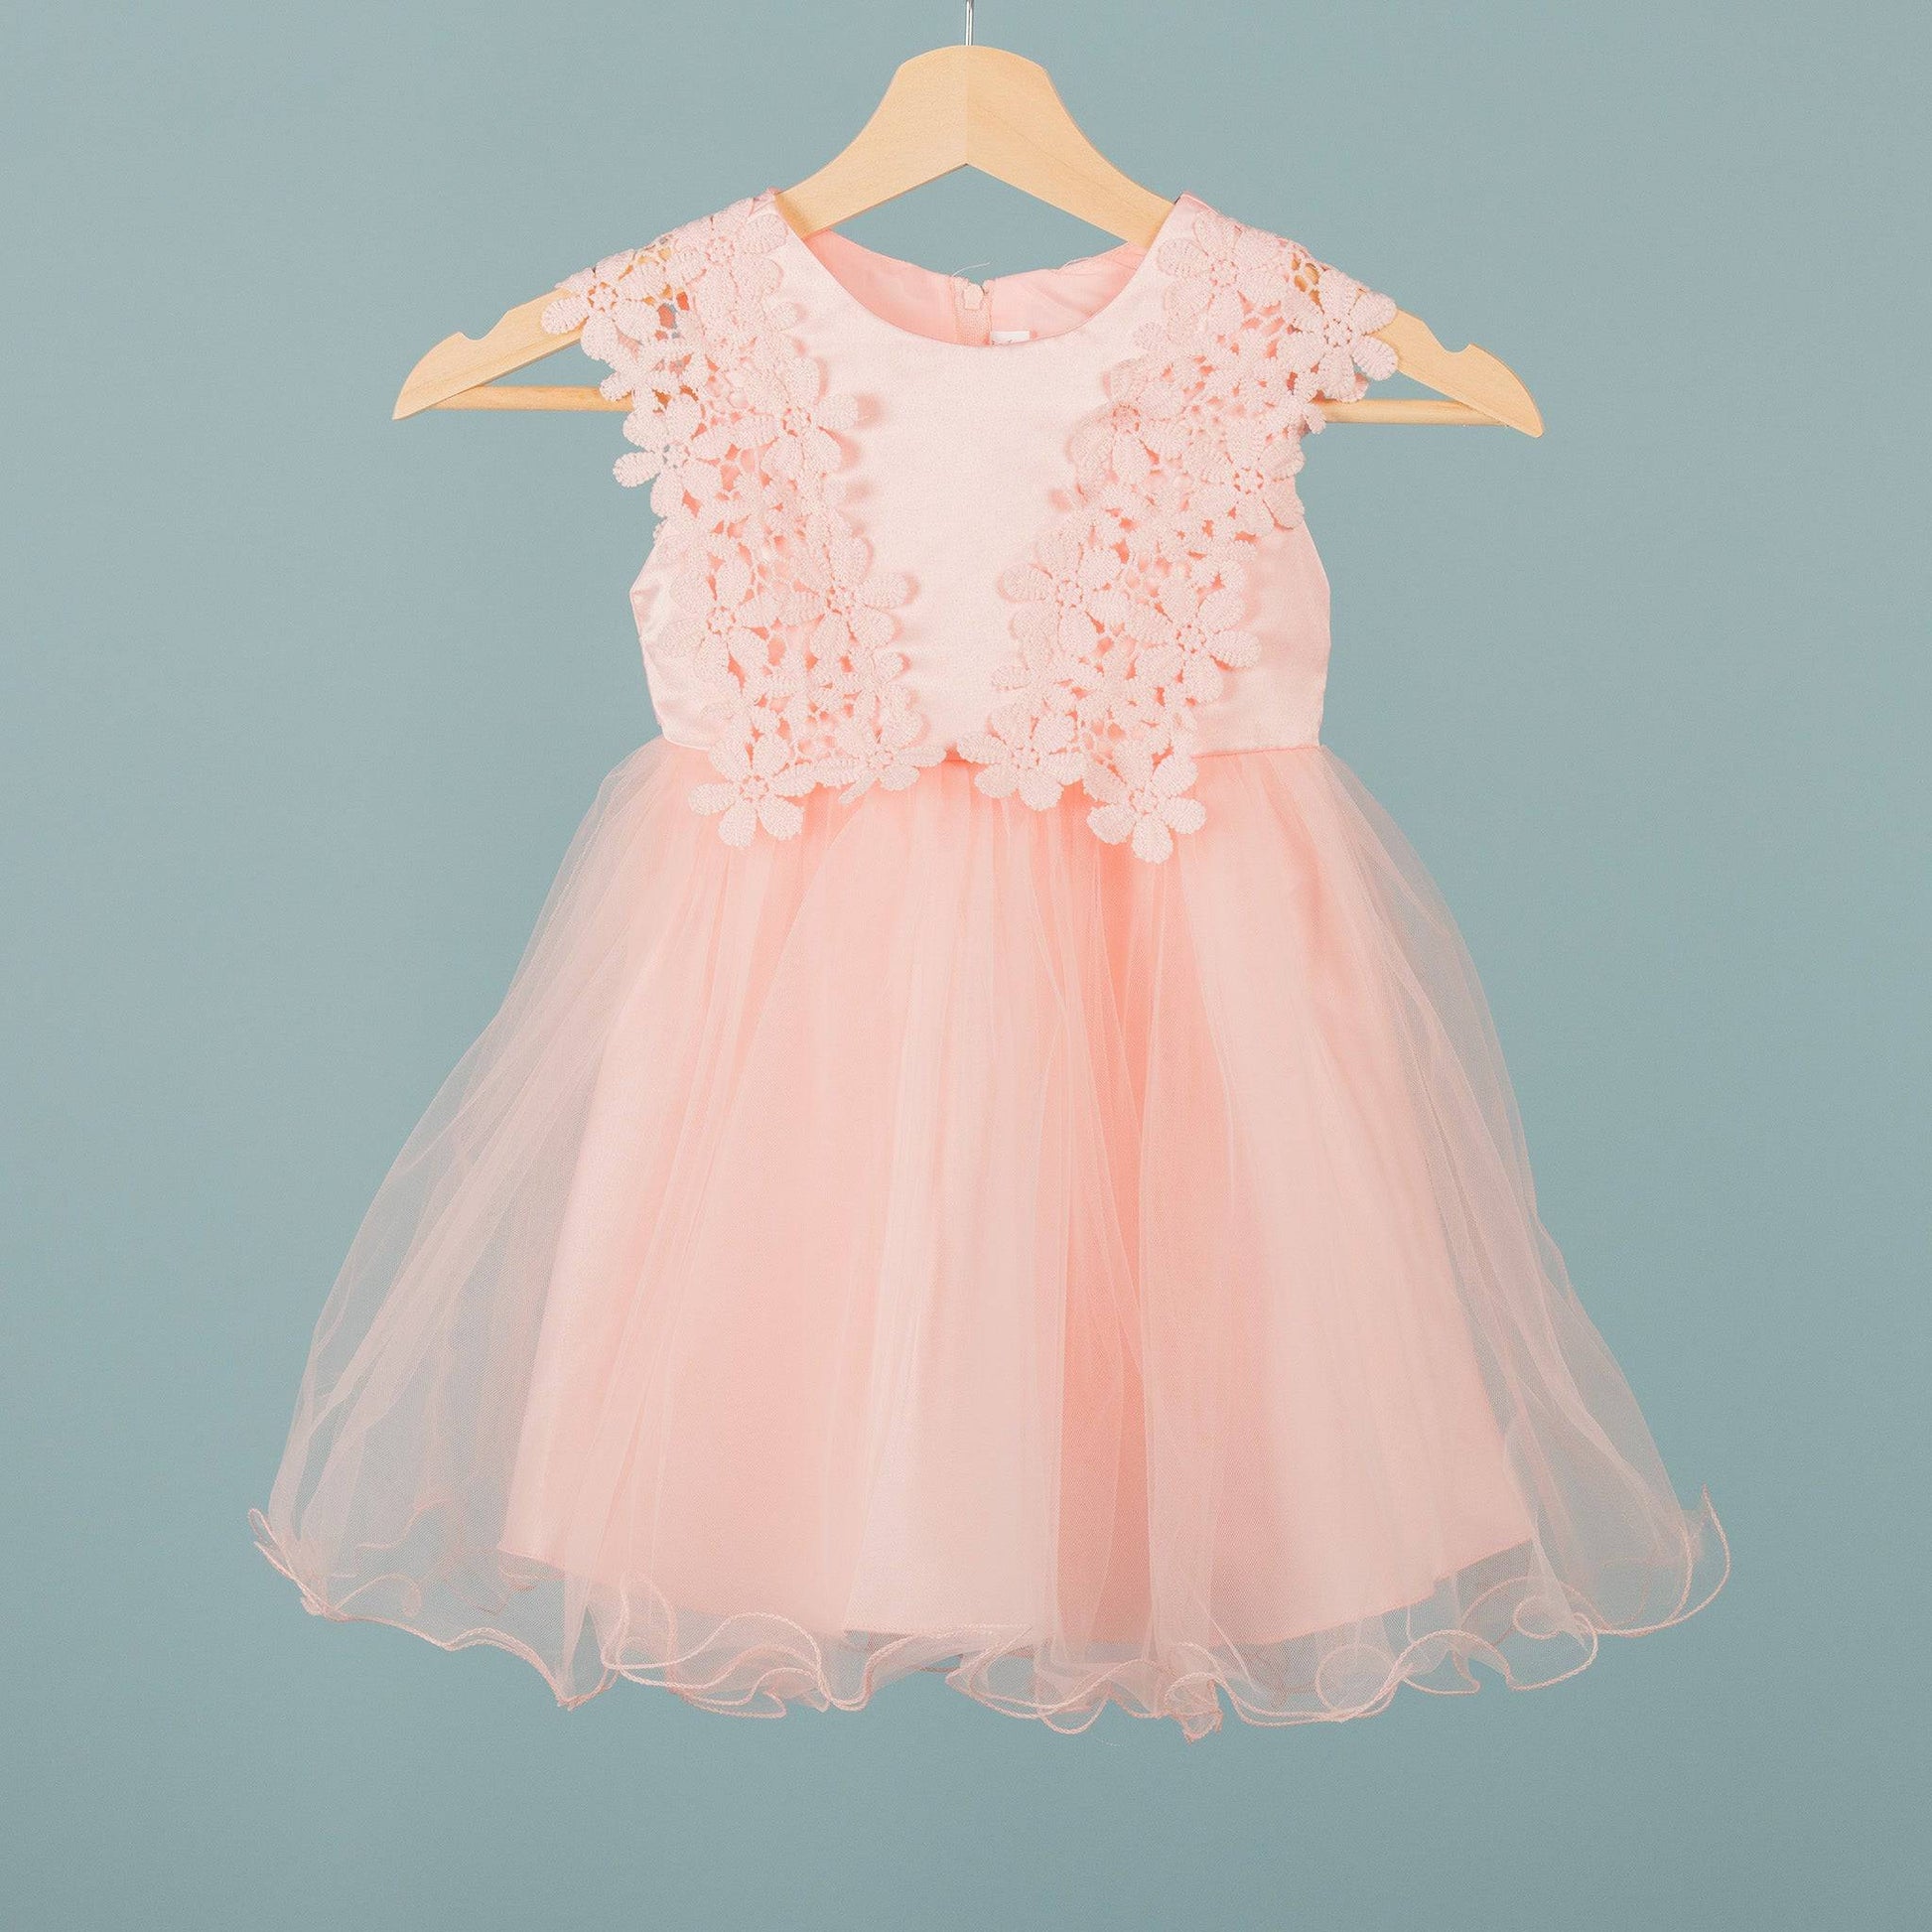 baby girl event dress pink